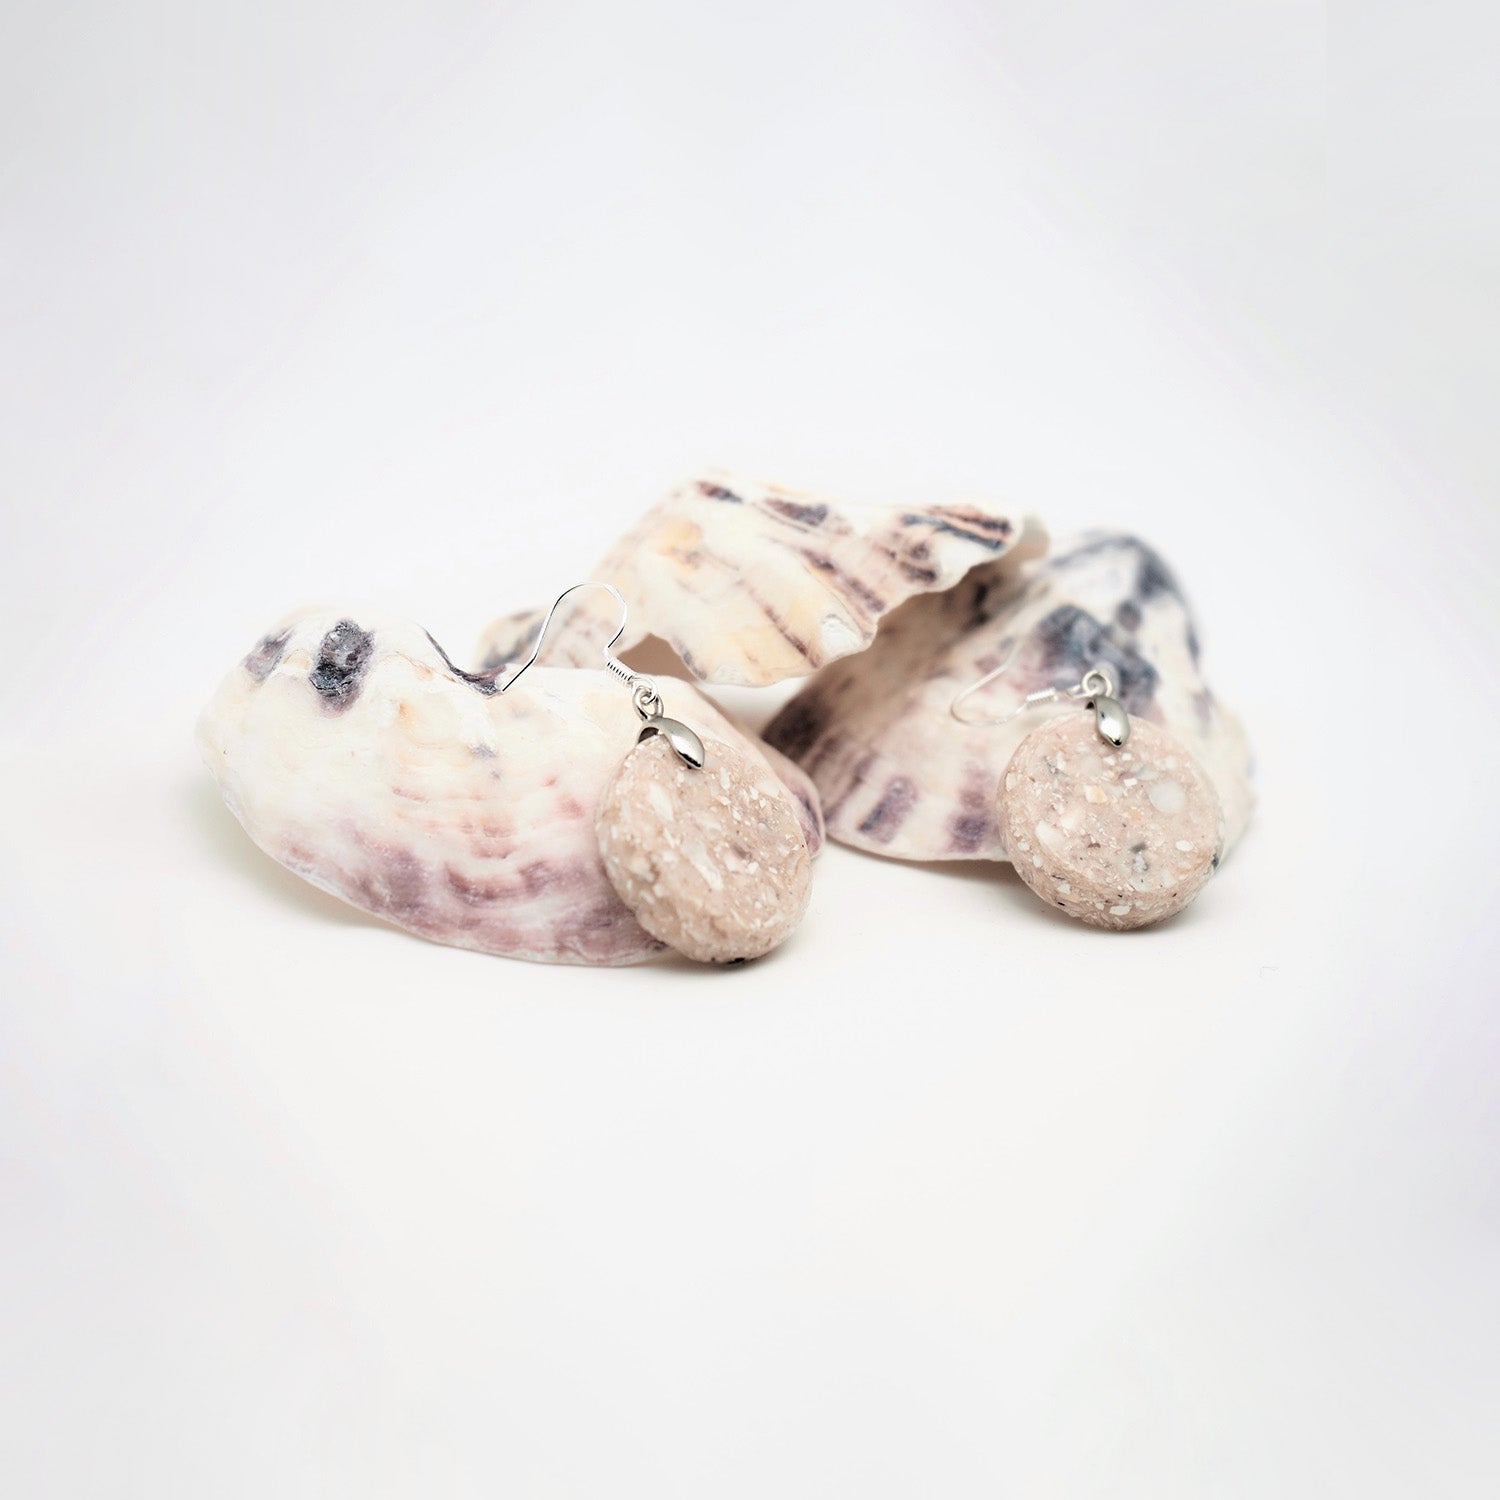 Round earrings made from recycled oyster shells